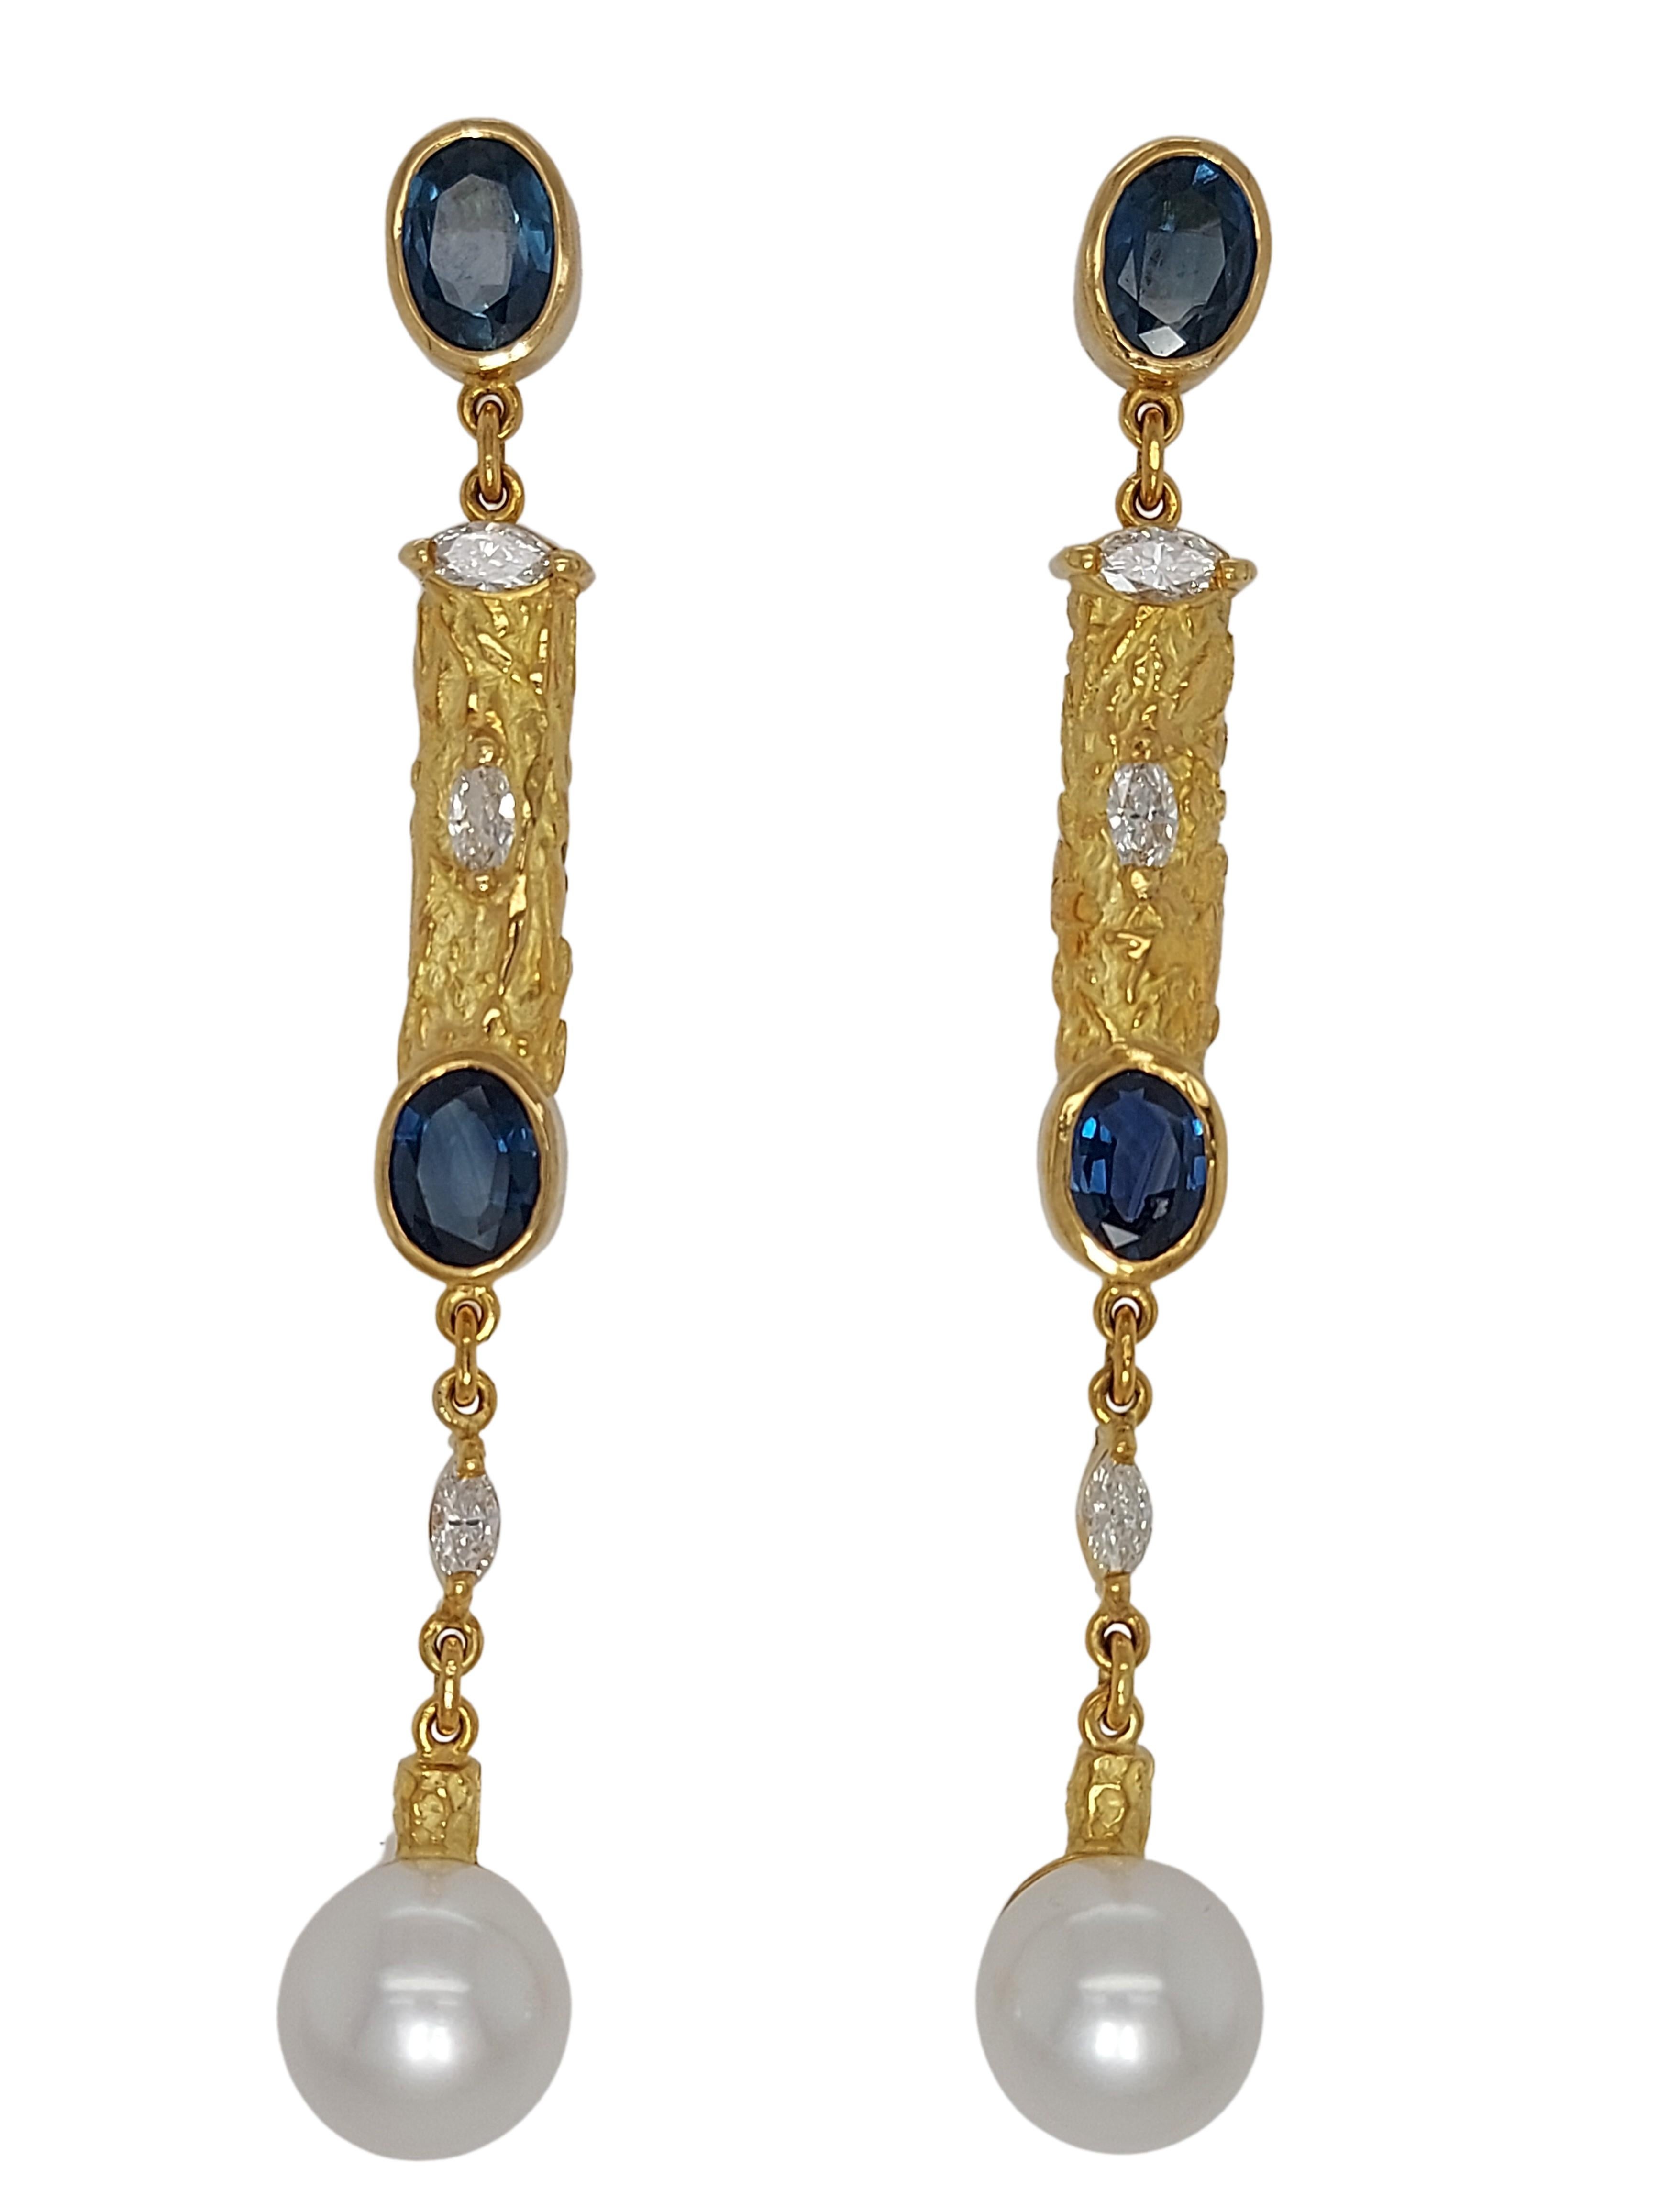 Magnificant hand crafted by the artist Jean Pierre De Saedeleer 18 kt yellow gold Earrings With 5.84 Ct Sapphires, 0.79 Ct Diamonds, Pearls

One of A kind and unique hand crafted, only 1 made !

Diamonds: Marquise cut diamonds (together approx.